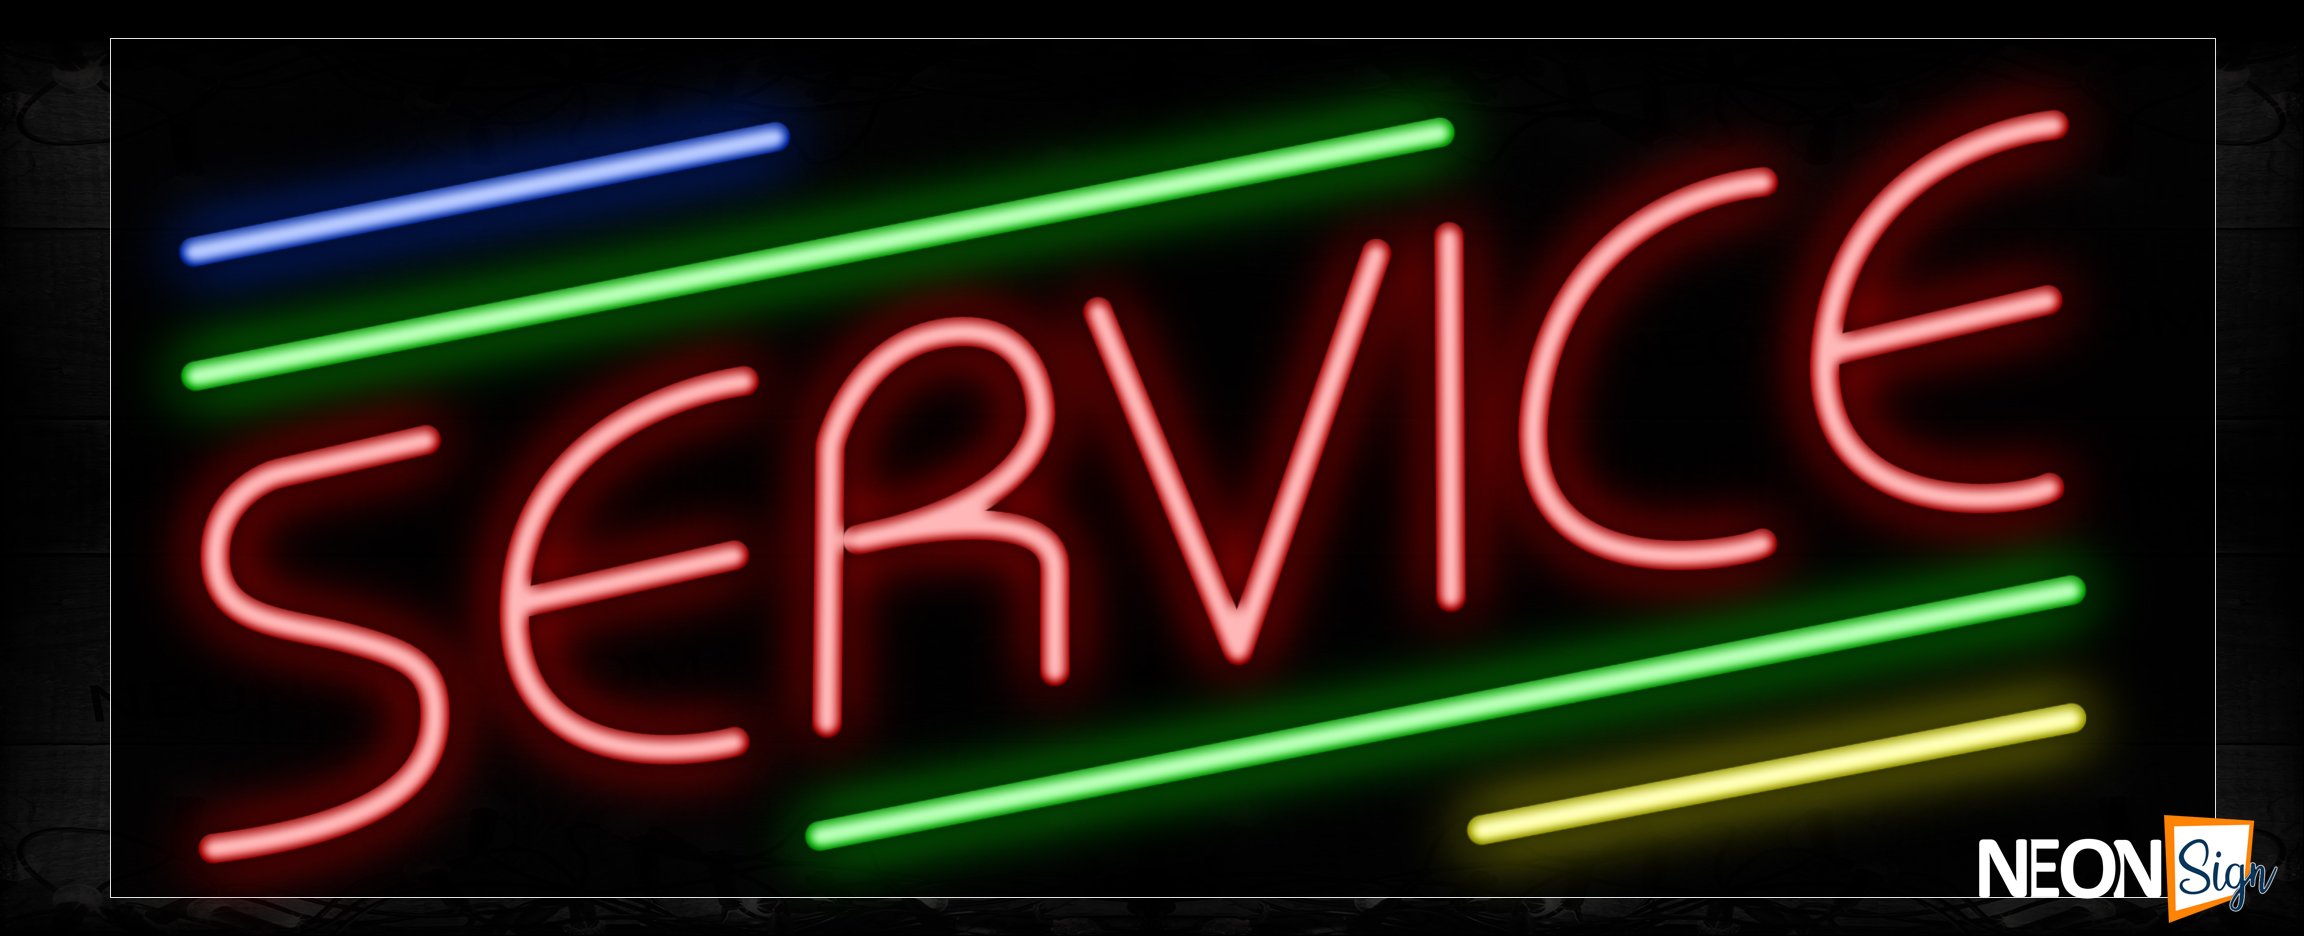 Image of 10894 Service in red with colorful lines Neon Sign_13x32 Black Backing